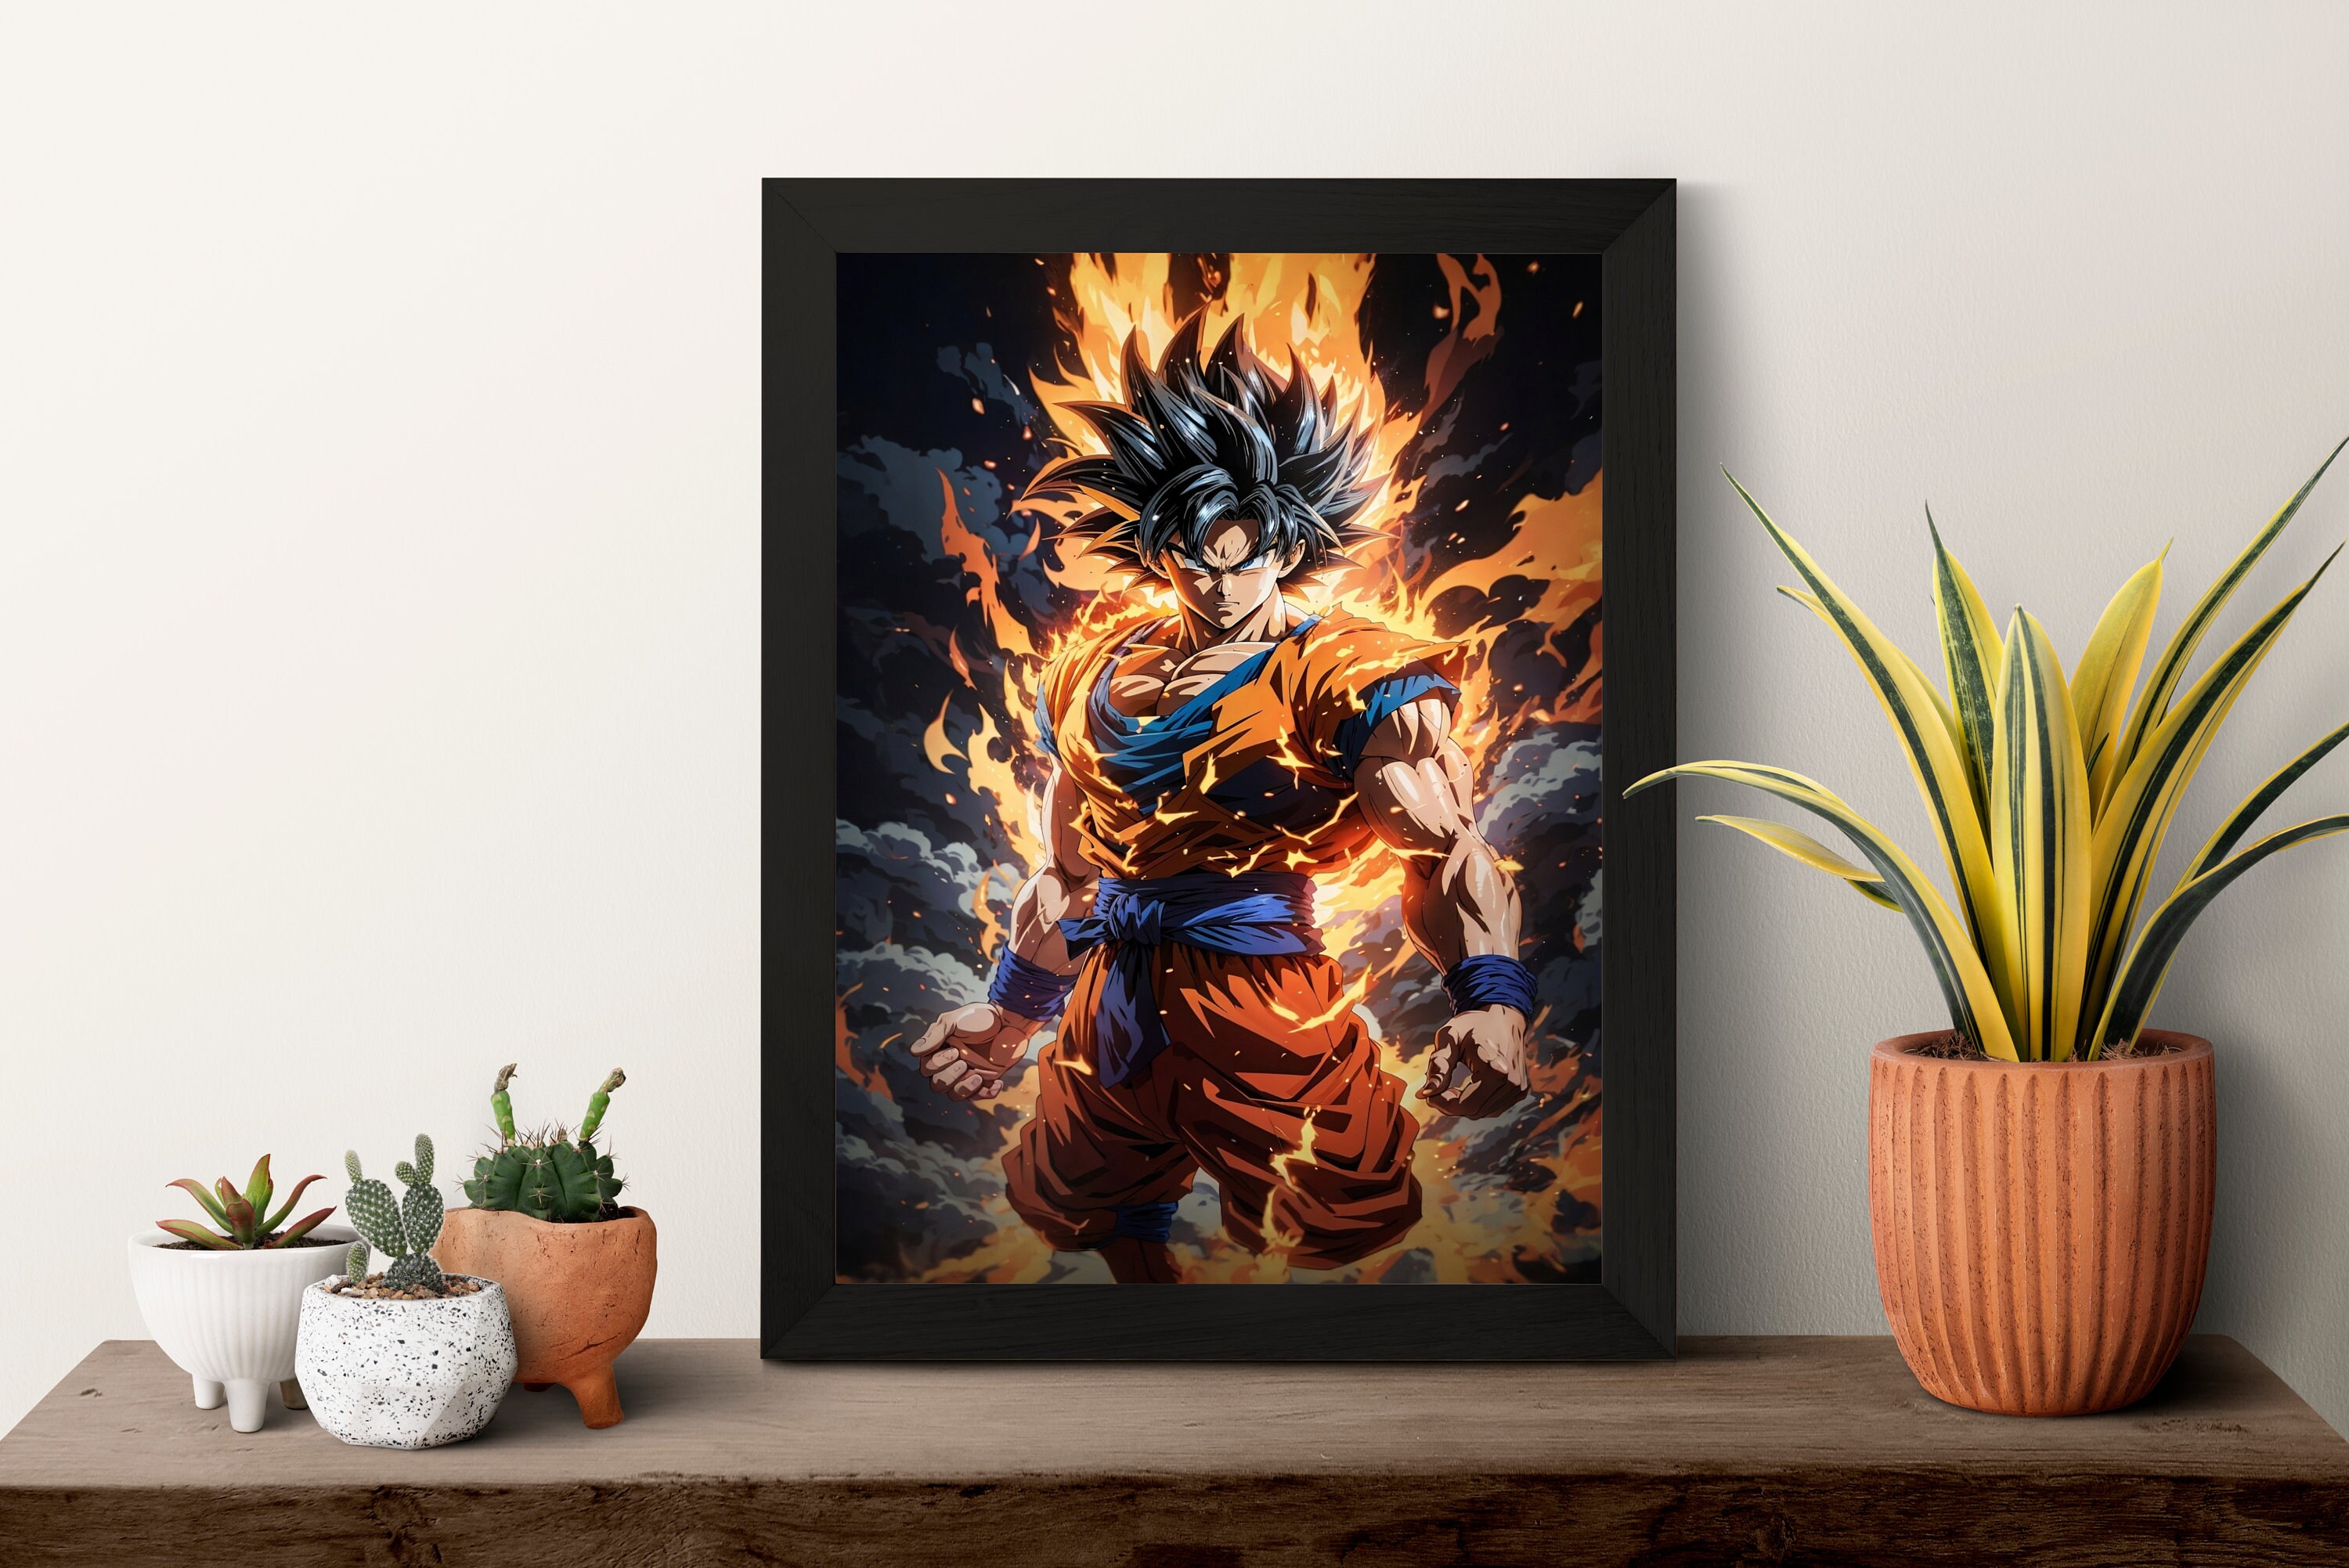 Dragon Ball Z Goku Fight wall decals stickers mural home decor for